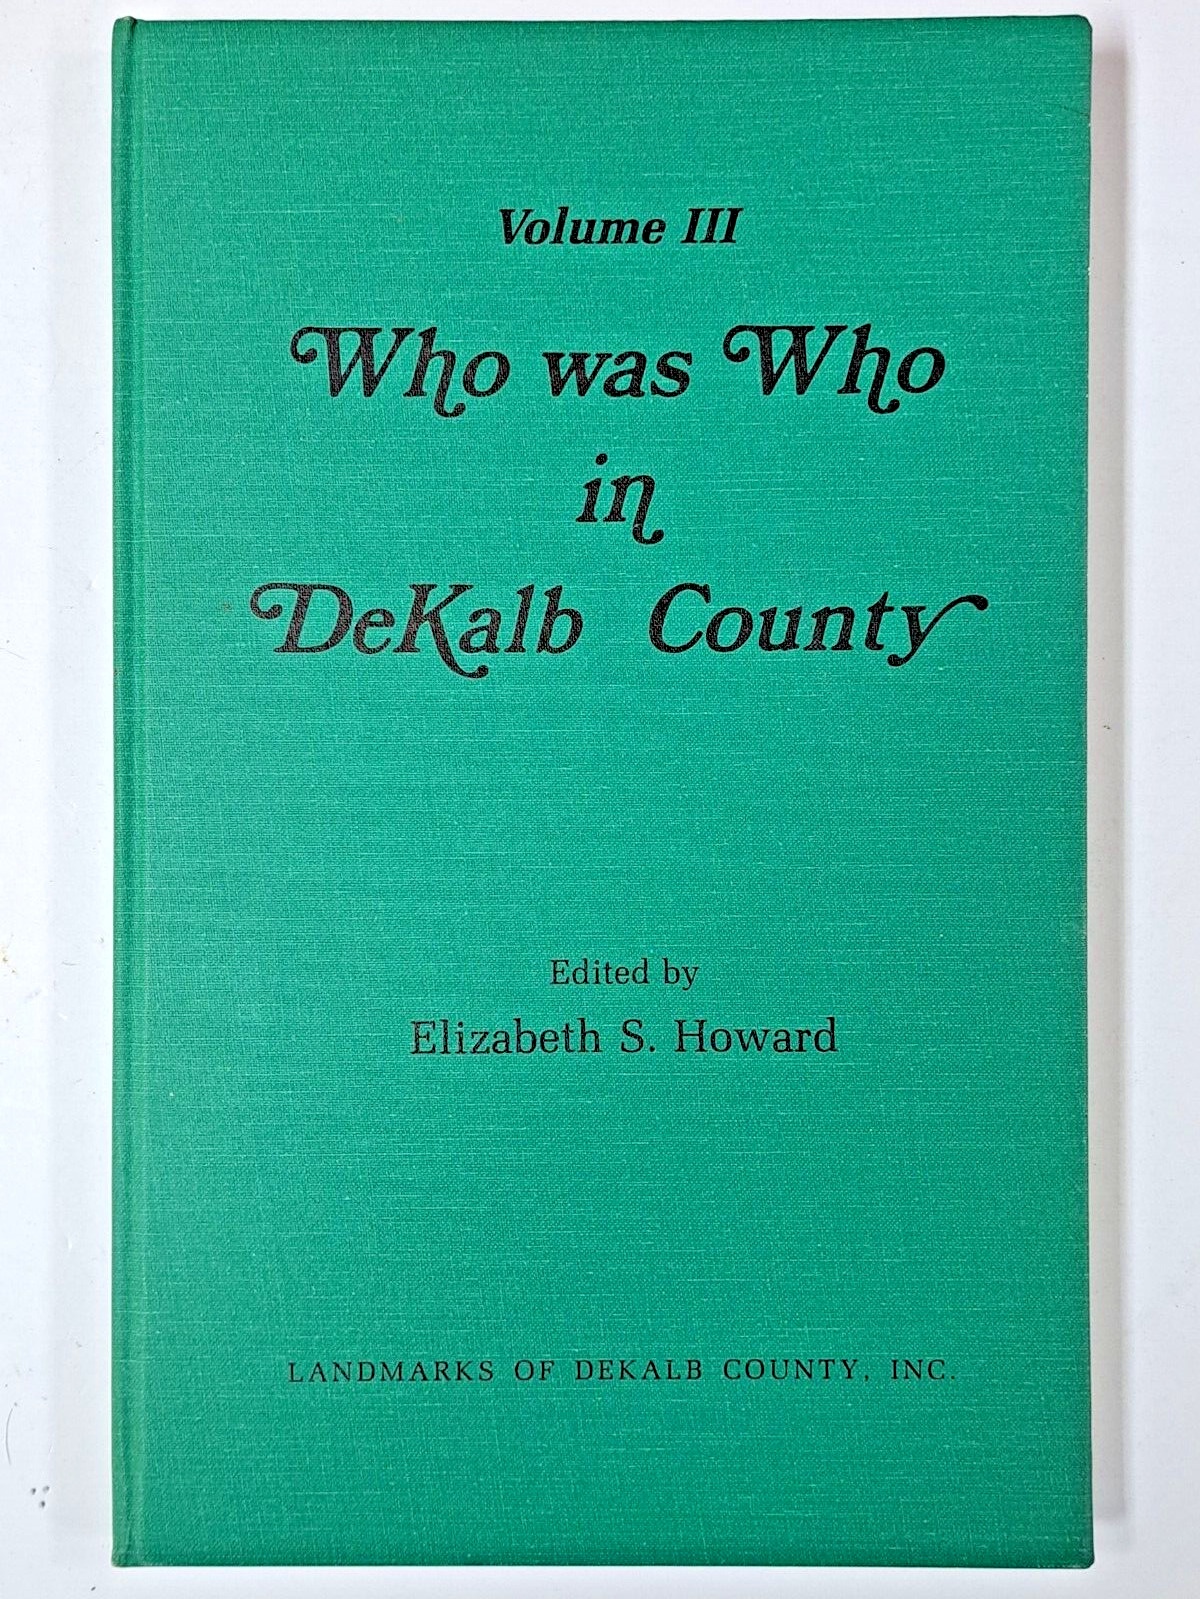 1987 WHO WAS WHO IN DEKALB COUNTY Volume 3 #471 of 1200 1st Edition Alabama